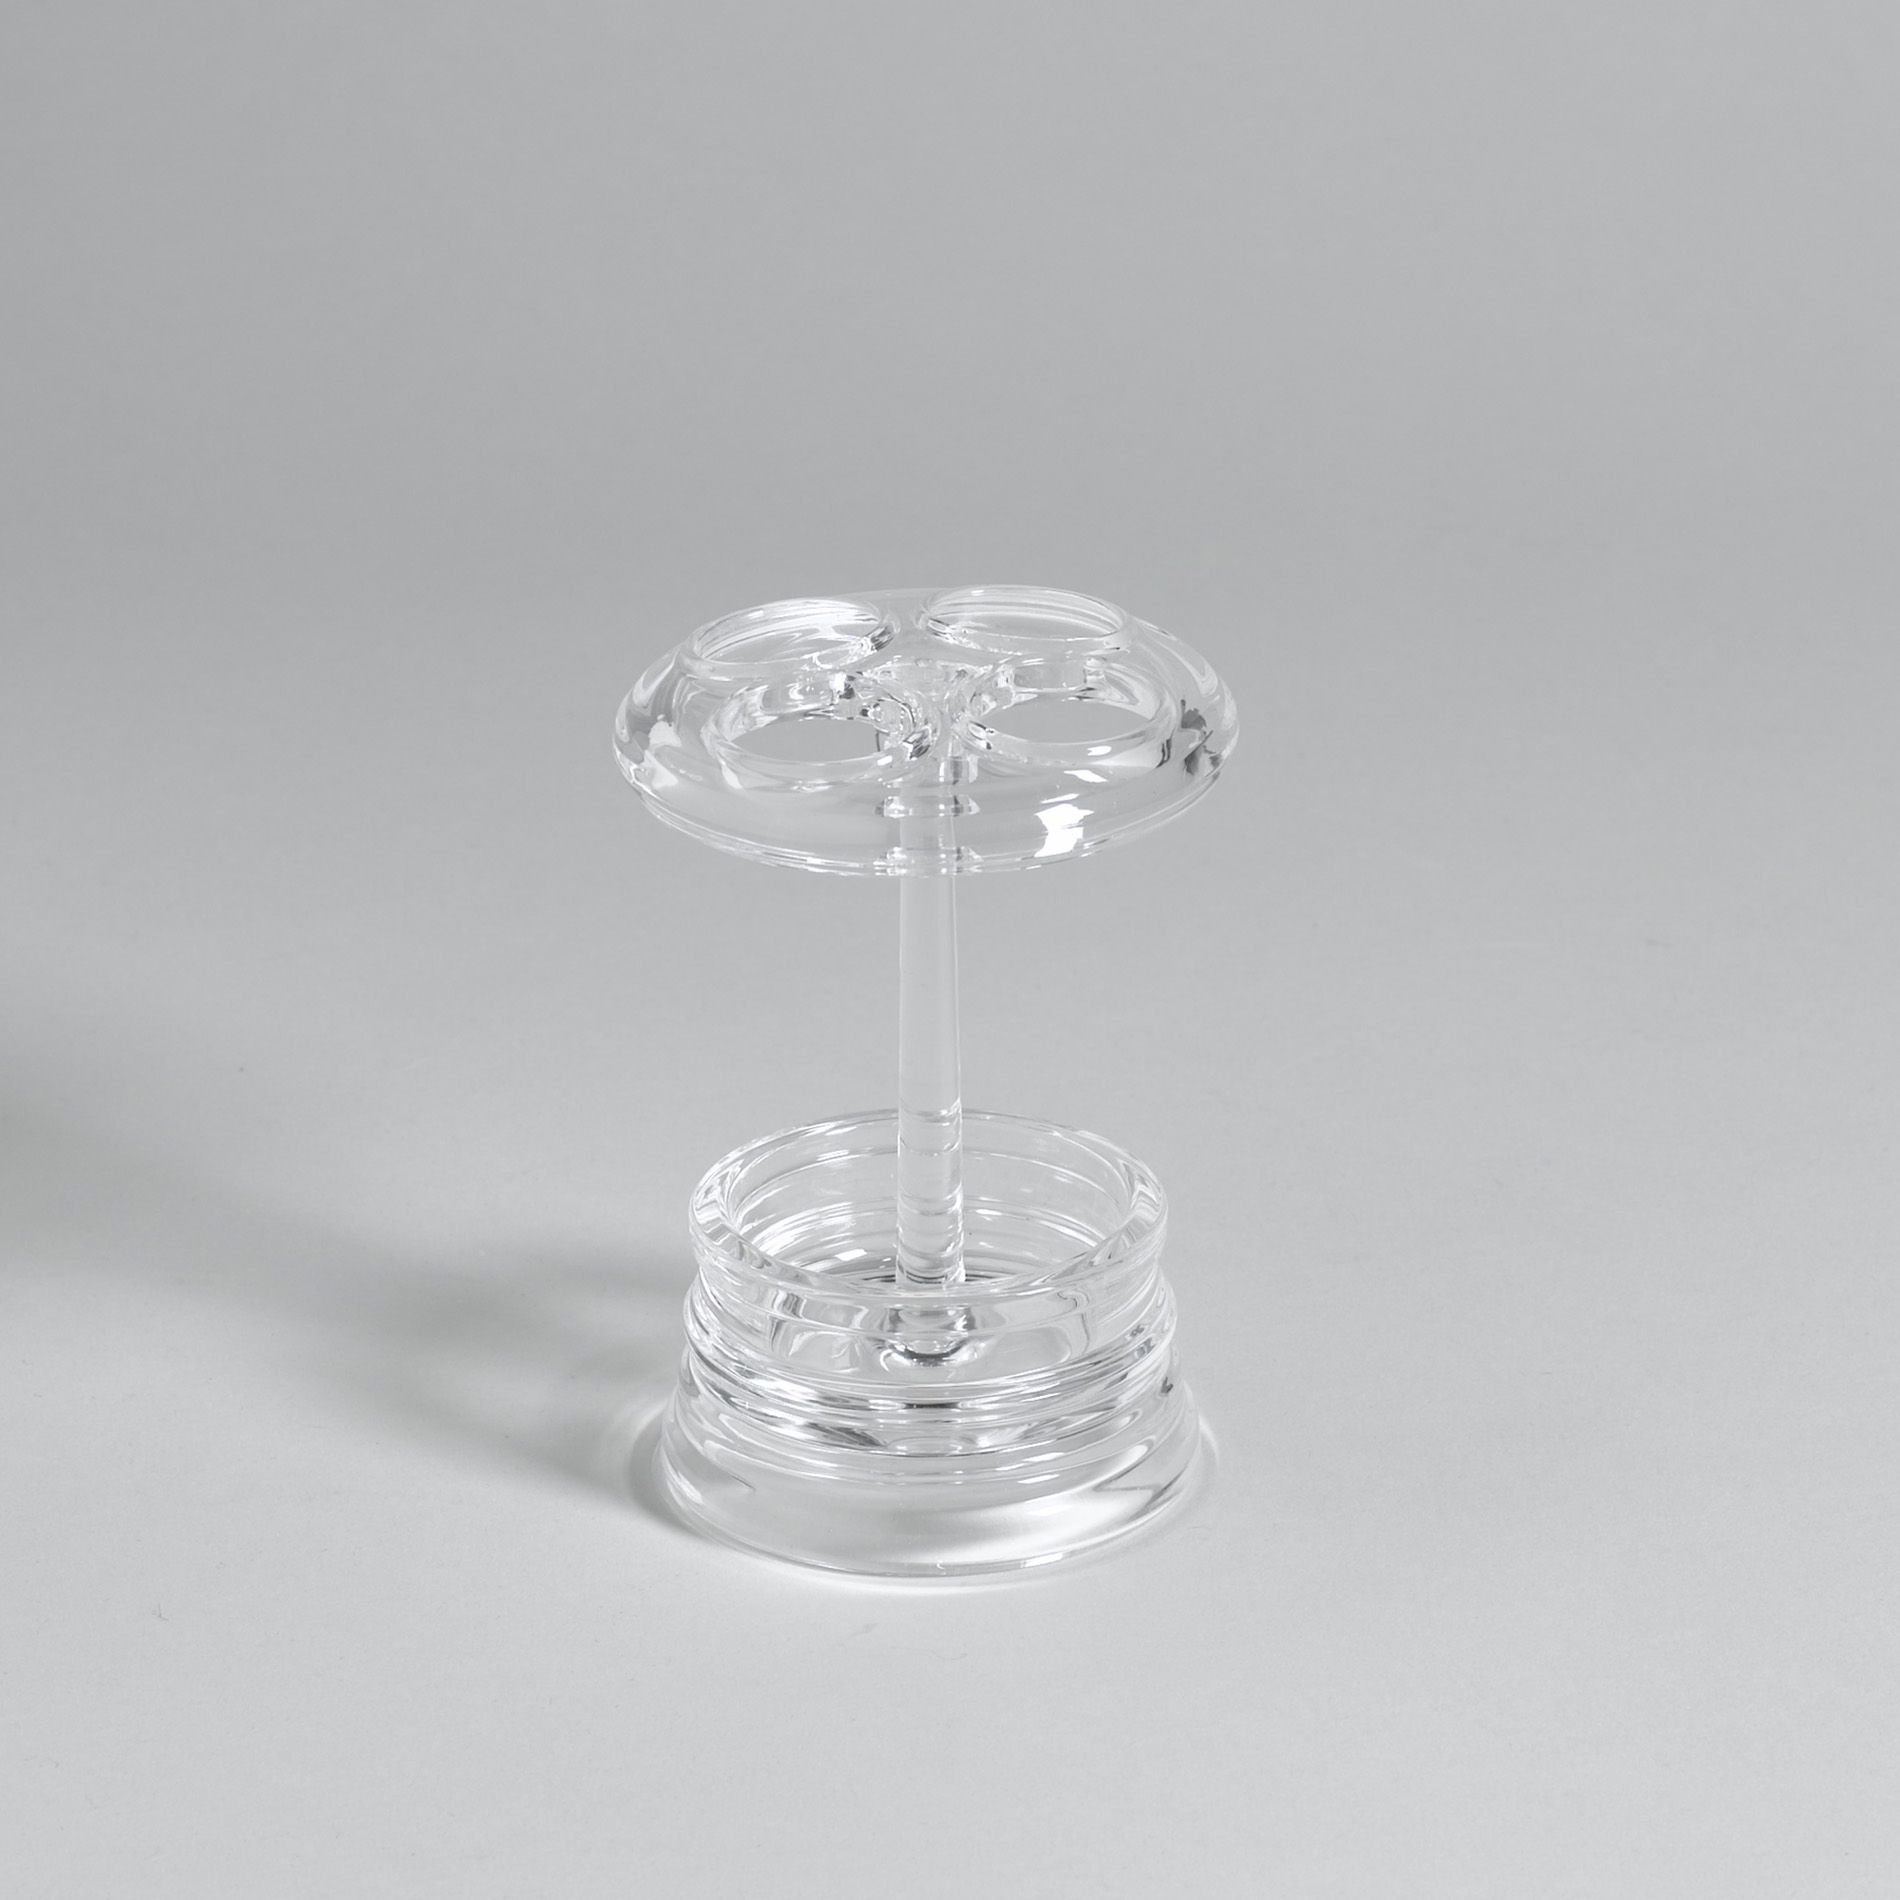 Cannon Brighton Clear Toothbrush Holder